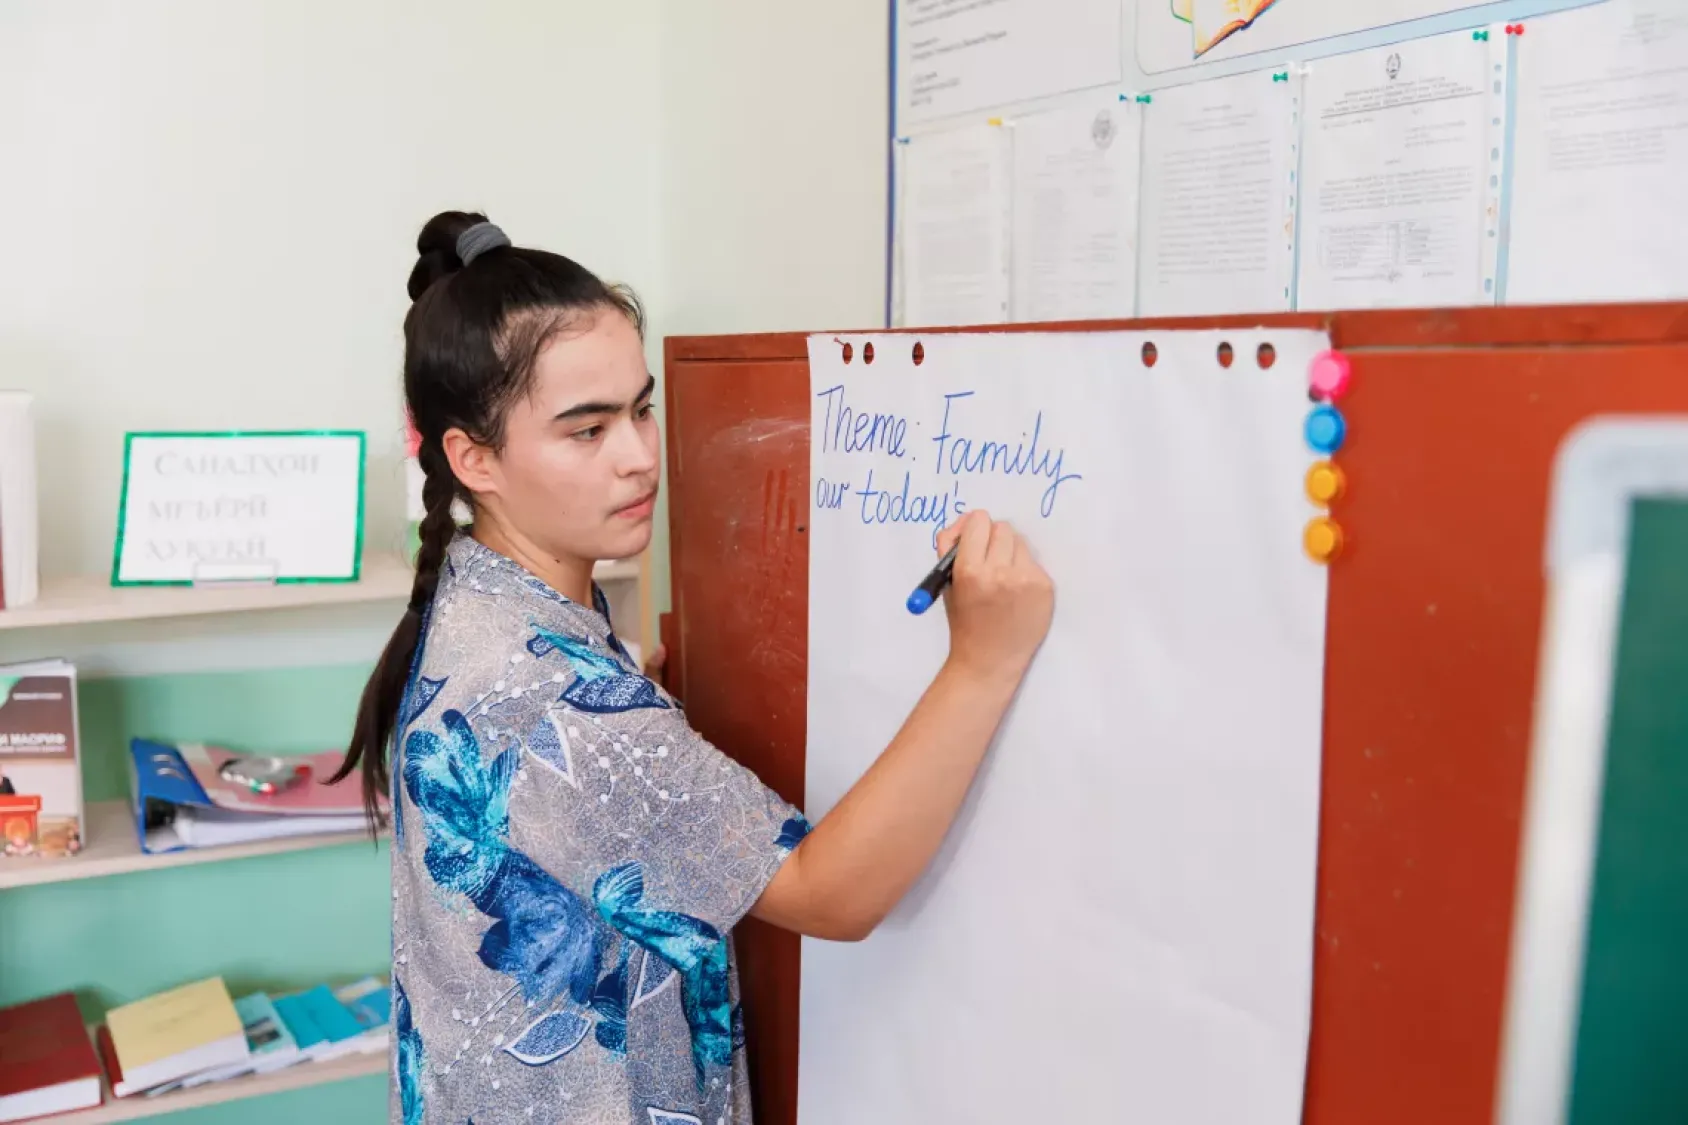 A teacher in a blue shirt and long braid writes on a paper board in a classroom.